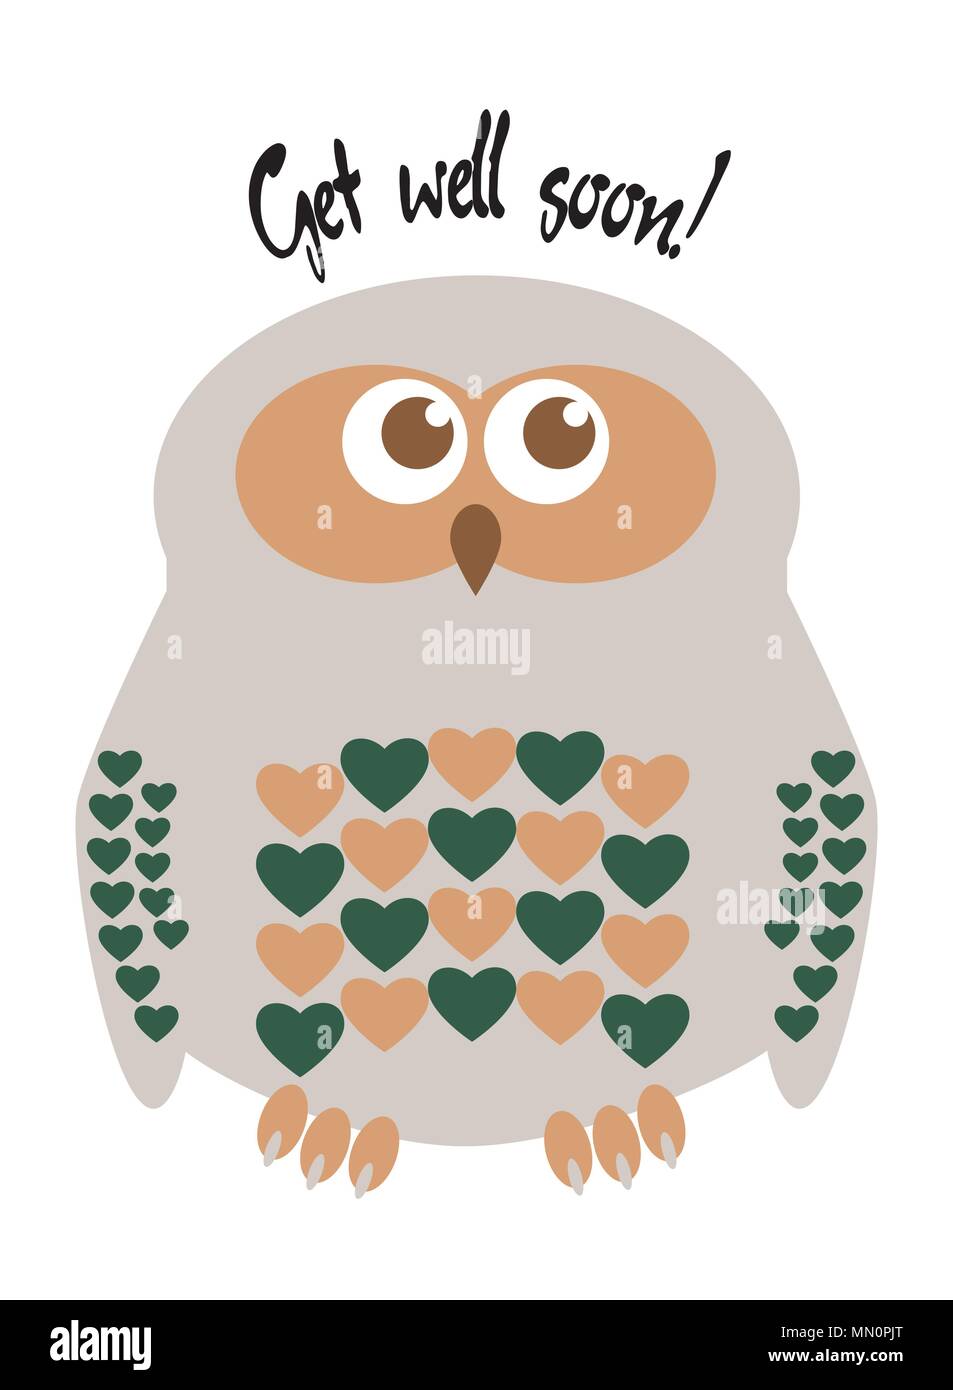 Owl cute character with hearts for feathers greeting card with text  'Get well soon!'. Editable labelled layers. Stock Vector